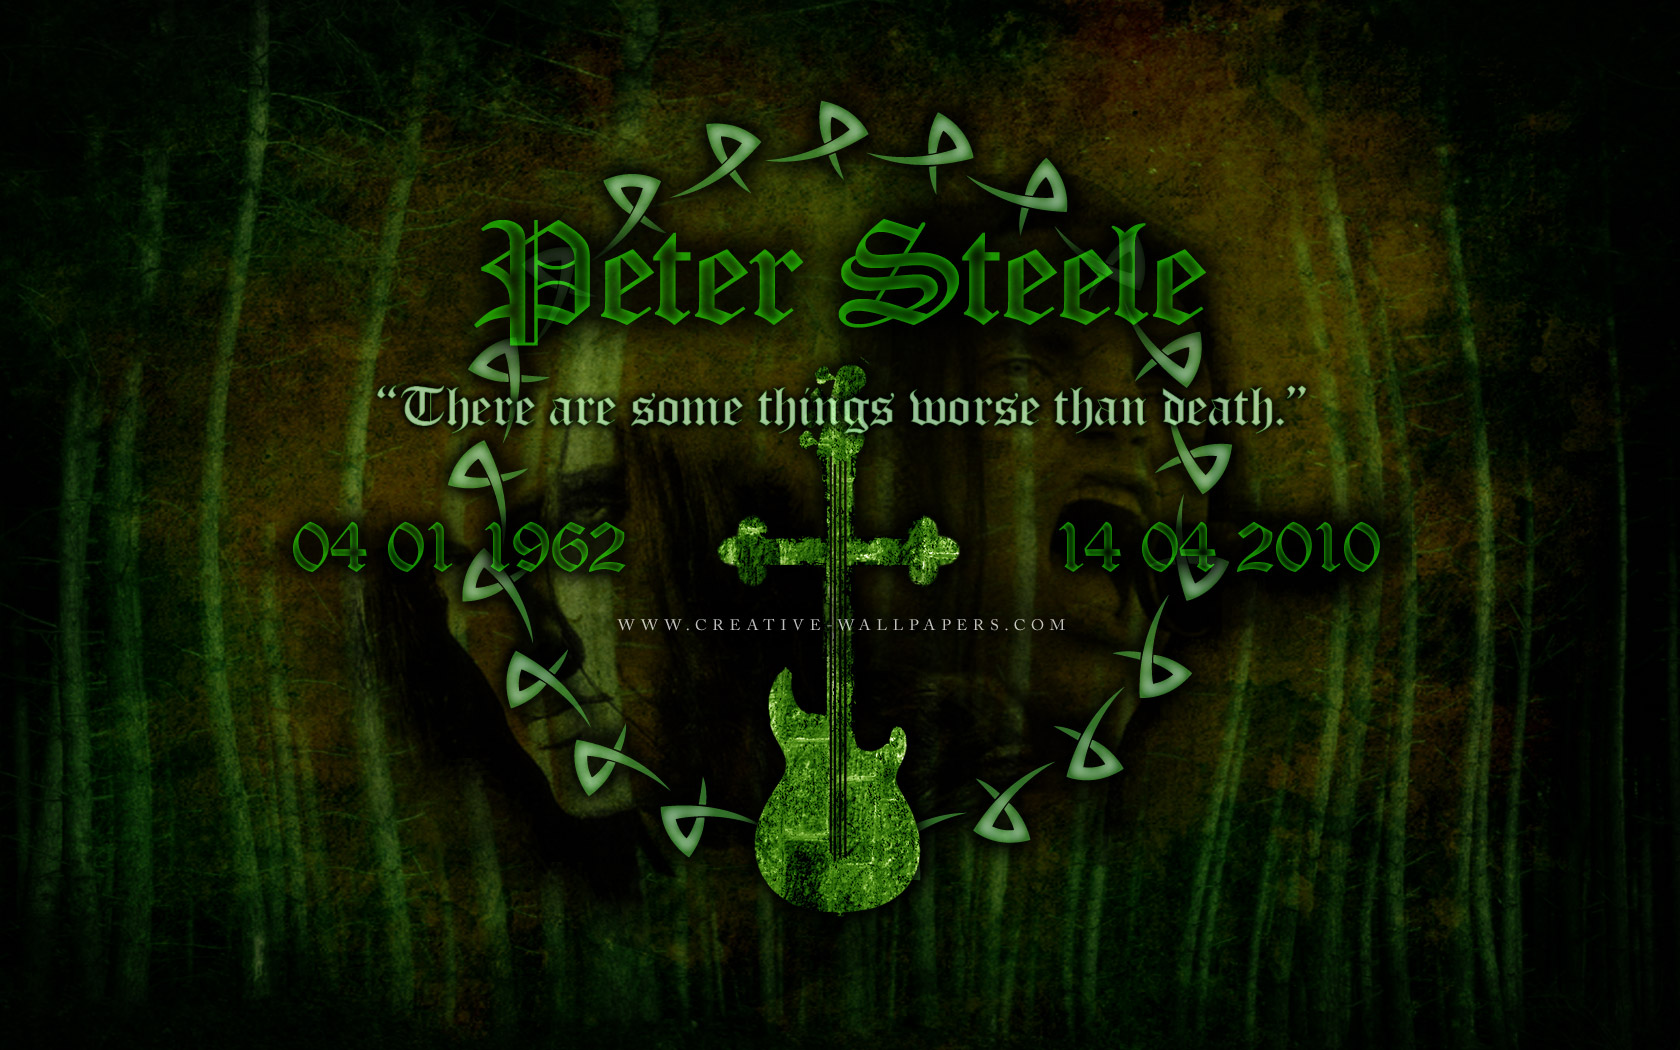 Peter Steele   Free Desktop Backgrounds from us at Creative Wallpapers